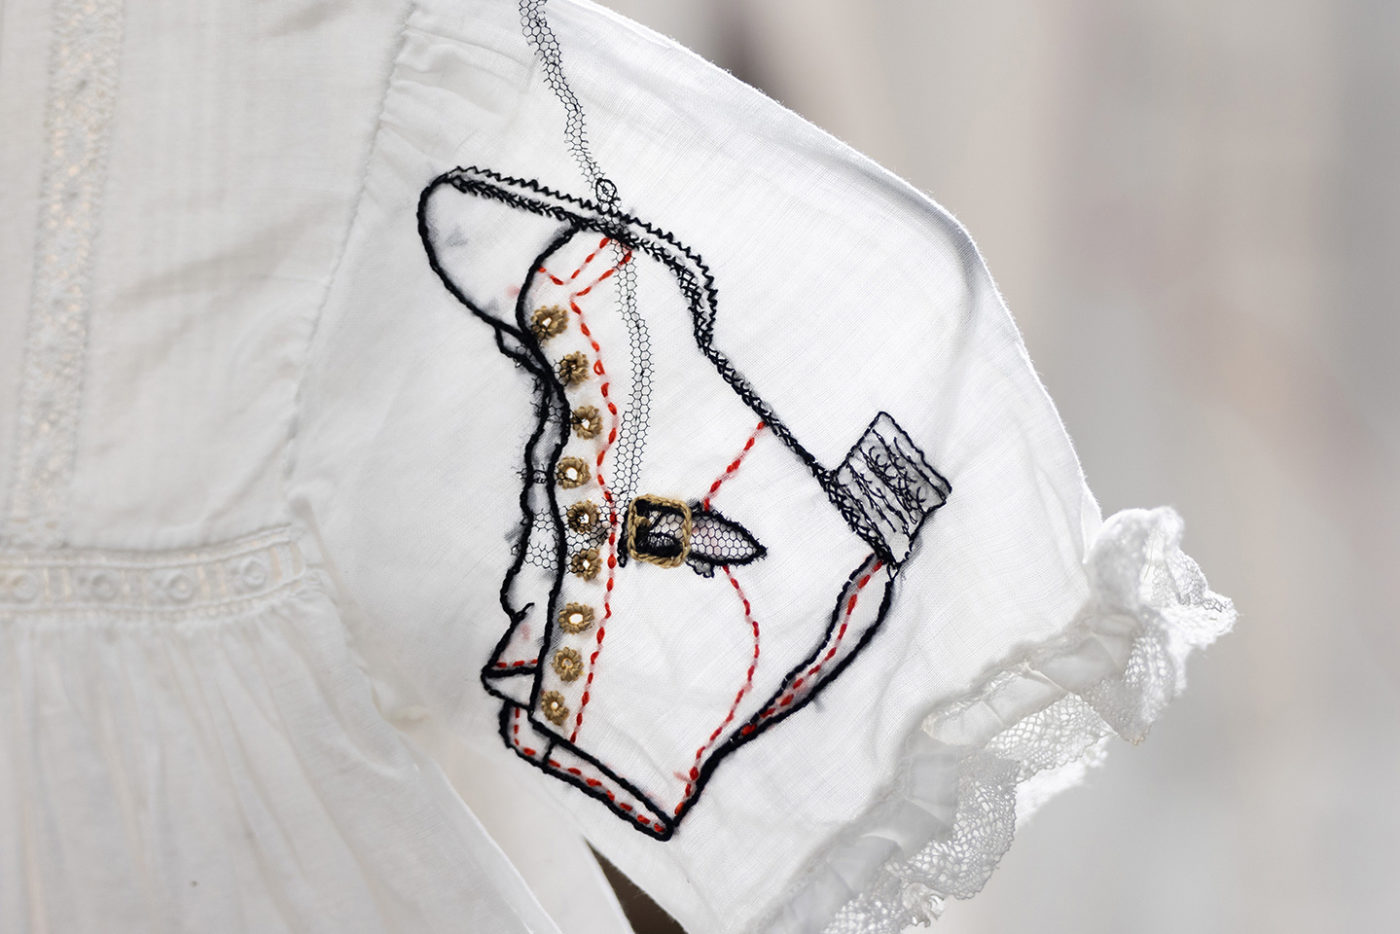 “In the war, in winter, I used to wear ice-skating boots without the blades.” Embroidery by Sophie Dinning. Photograph by Scott Murray.